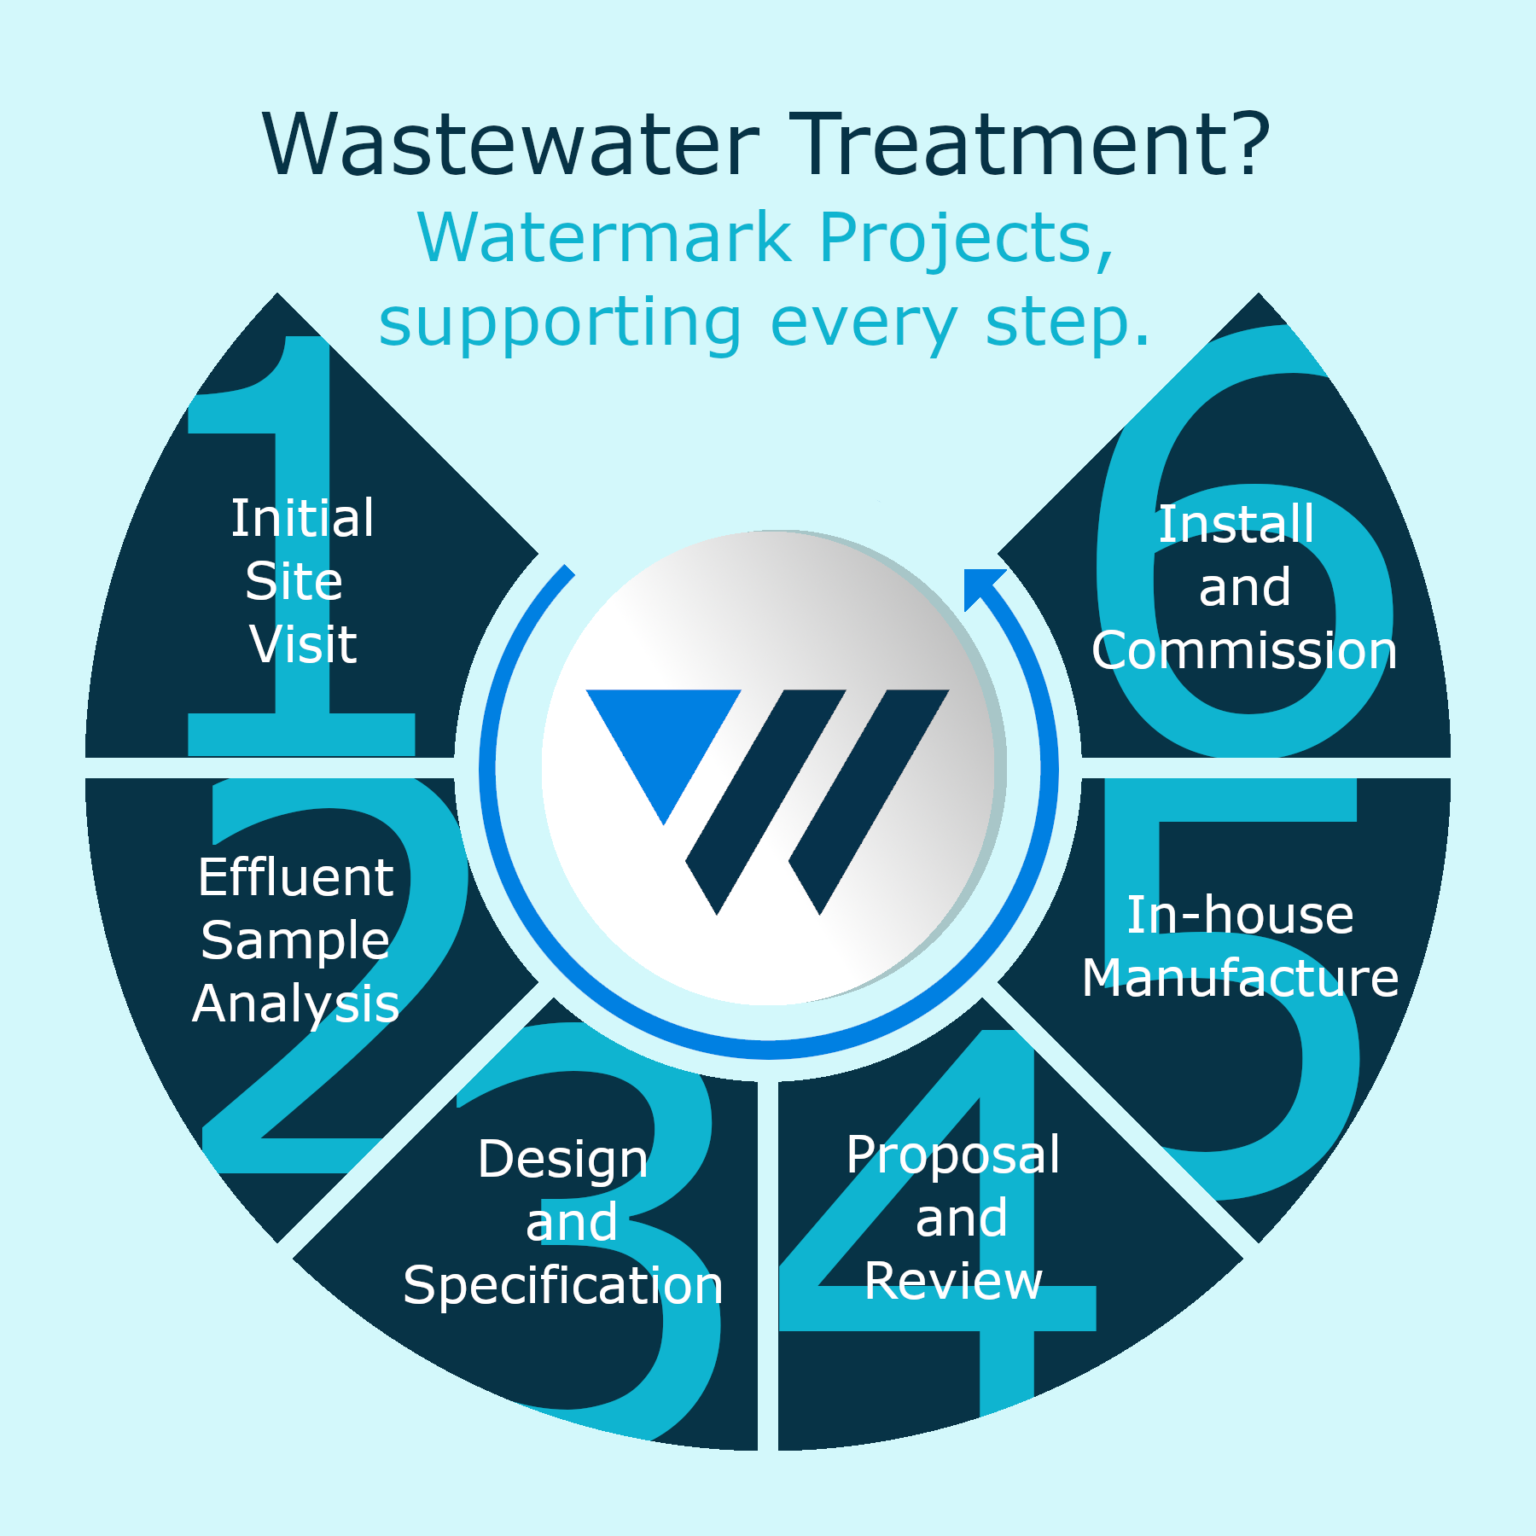 Wastewater Treatment Steps